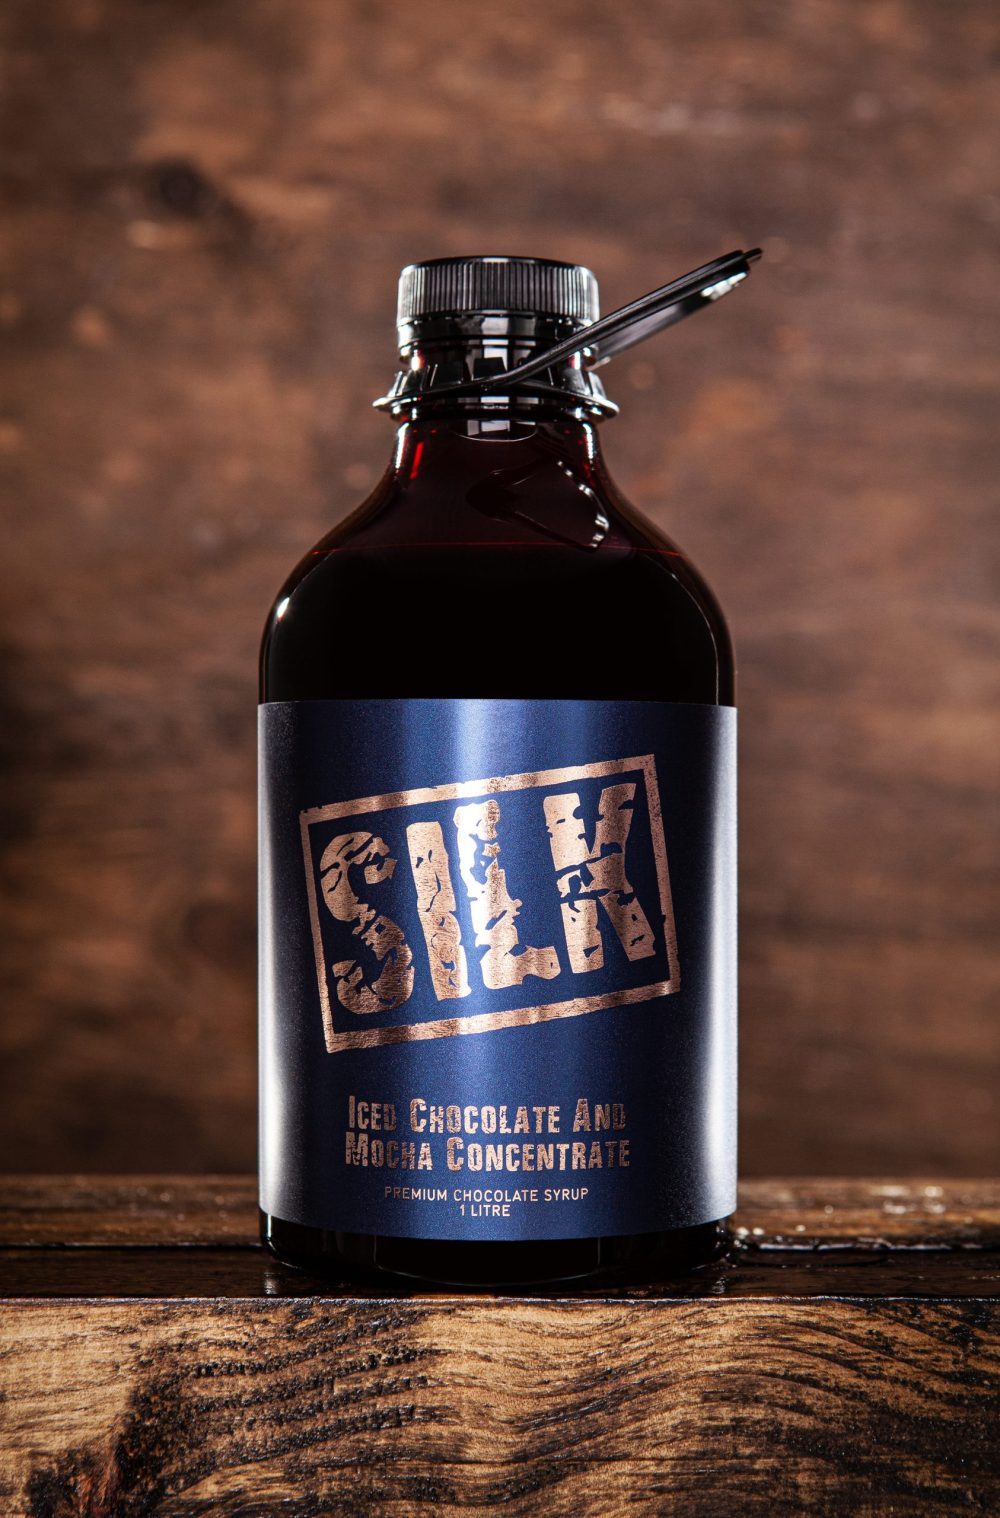 SILK Iced Chocolate and Mocha Concentrate (Formerly Belgian Choc)